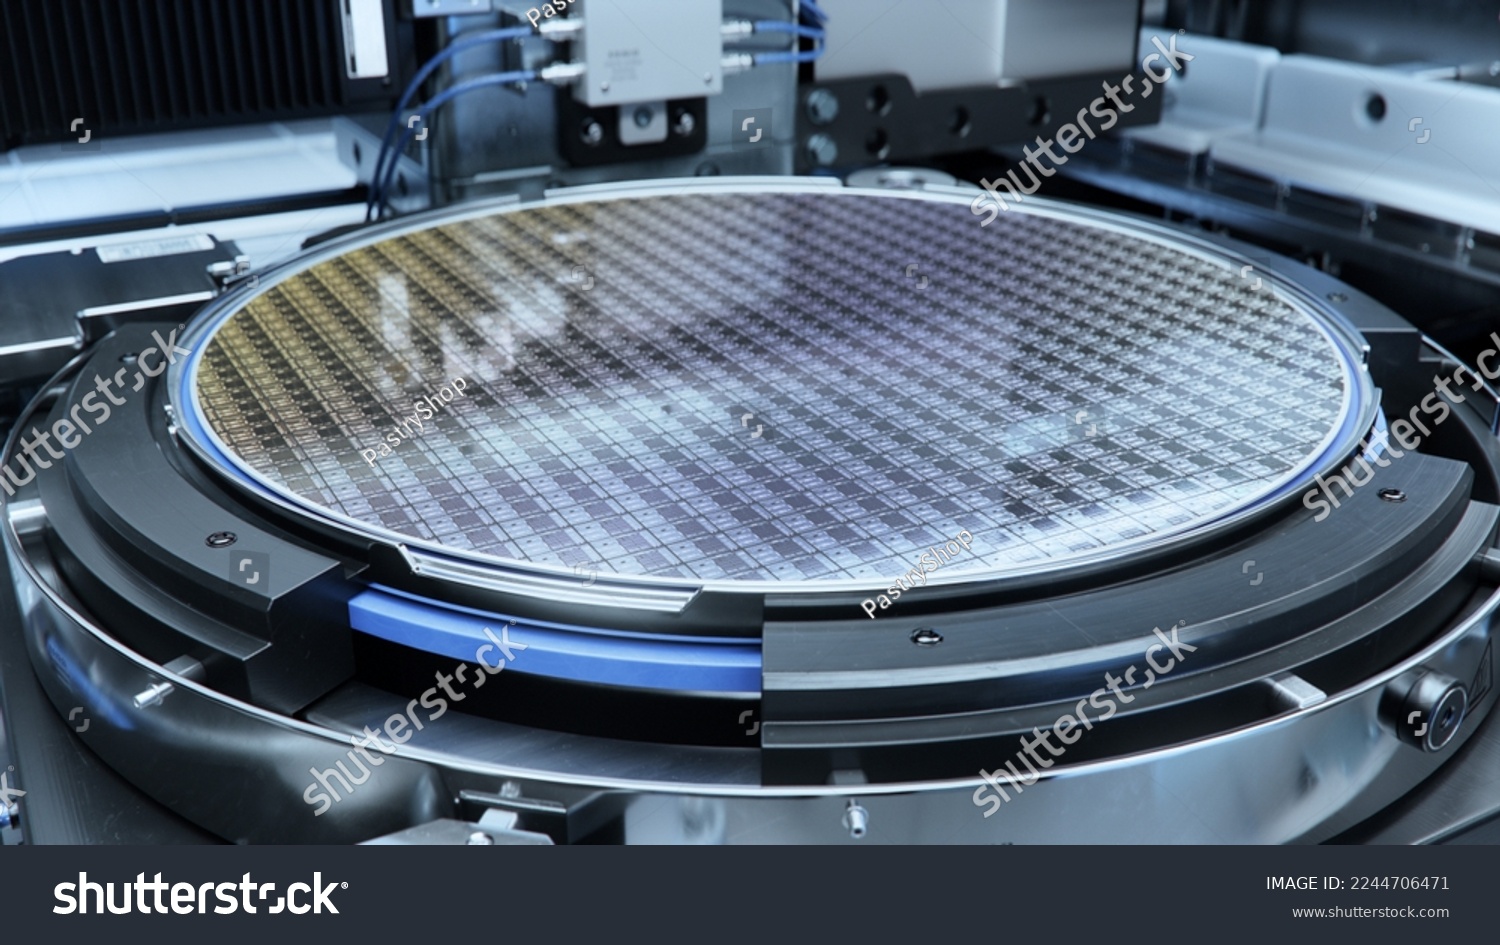 Close-up Shot of a Silicon Wafer inside Photolithography Machine. Shot of Wafer during Semiconductor and Computer Chip Manufacturing at Fab or Foundry. #2244706471